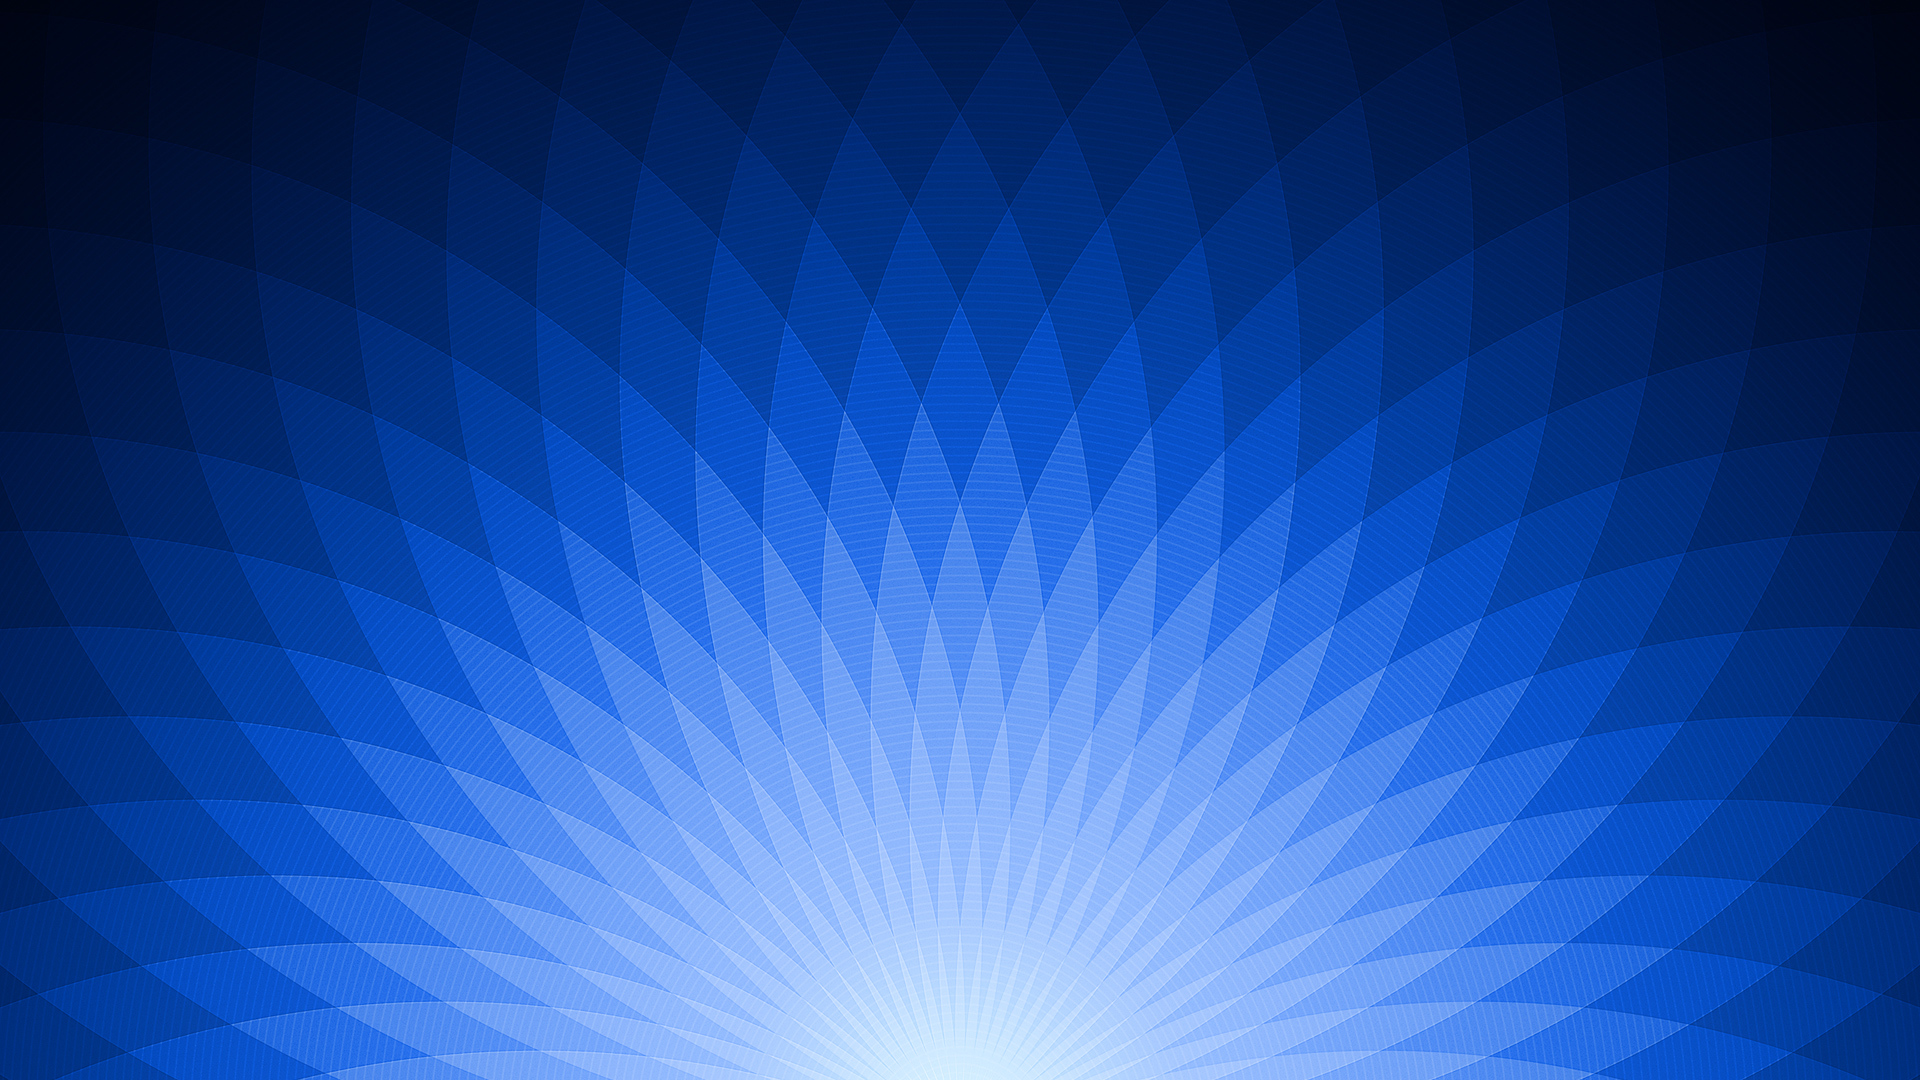 Blue iPhone wallpapers